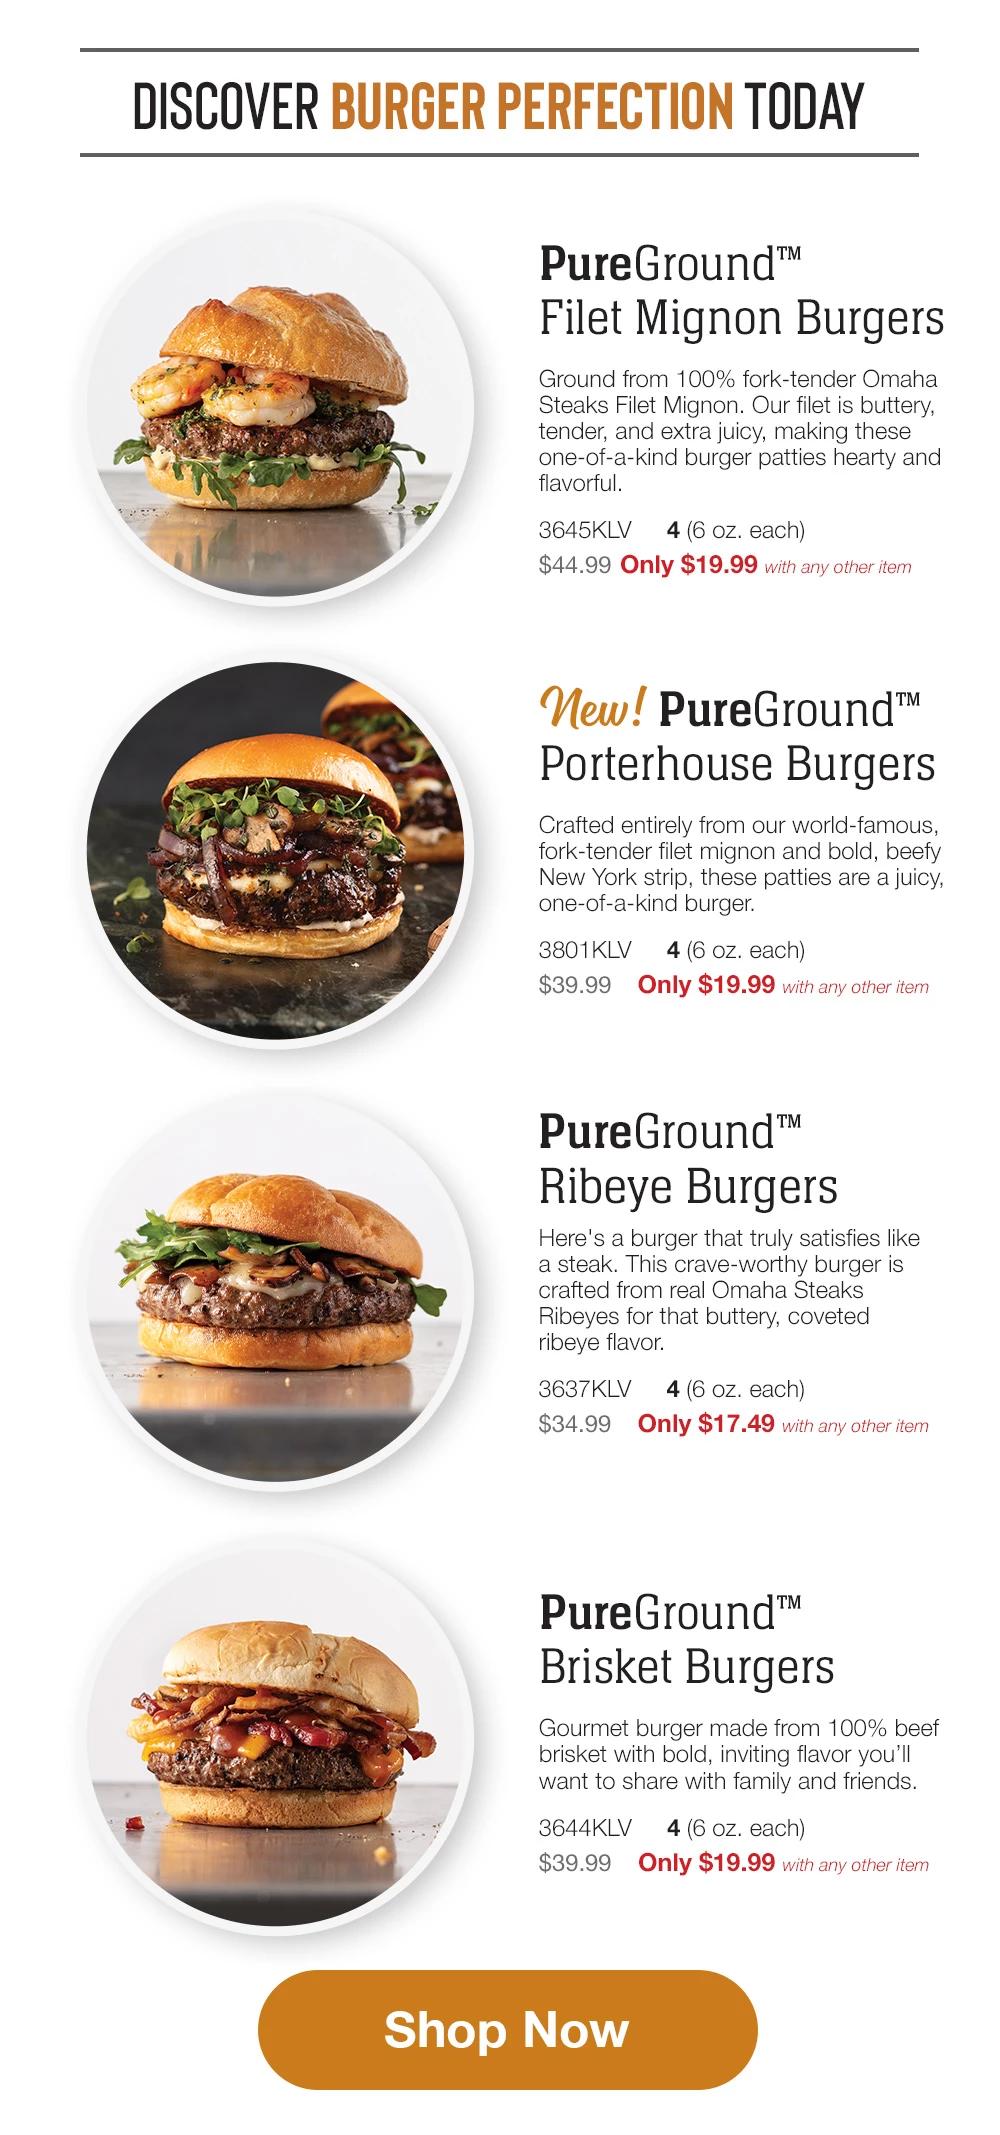 DISCOVER BURGER PERFECTION TODAY | PureGround™ Filet Mignon Burgers - Ground from 100% fork-tender Omaha Steaks Filet Mignon. Our filet is buttery, tender, and extra juicy, making these one-of-a-kind burger patties hearty and flavorful. - 3645KLV 4 (6 oz. each) $44.99 Only $19.99 with any other item | Porterhouse Burgers - Crafted entirely from our world-famous, fork-tender filet mignon and bold, beefy New York strip, these patties are a juicy, one-of-a-kind burger. - 3801KLV 4 (6 oz. each) $39.99 Only $19.99 with any other item | PureGround™ Ribeye Burgers - Here's a burger that truly satisfies like a steak. This crave-worthy burger is crafted from real Omaha Steaks Ribeyes for that buttery, coveted ribeye flavor. - 3637KLV $34.99 4 (6 oz. each) Only $17.49 with any other item | Pure Ground™ Brisket Burgers - Gourmet burger made from 100% beef brisket with bold, inviting flavor you'll want to share with family and friends. - 3644KLV 4 (6 oz. each) $39.99 Only $19.99 with any other item || Shop Now